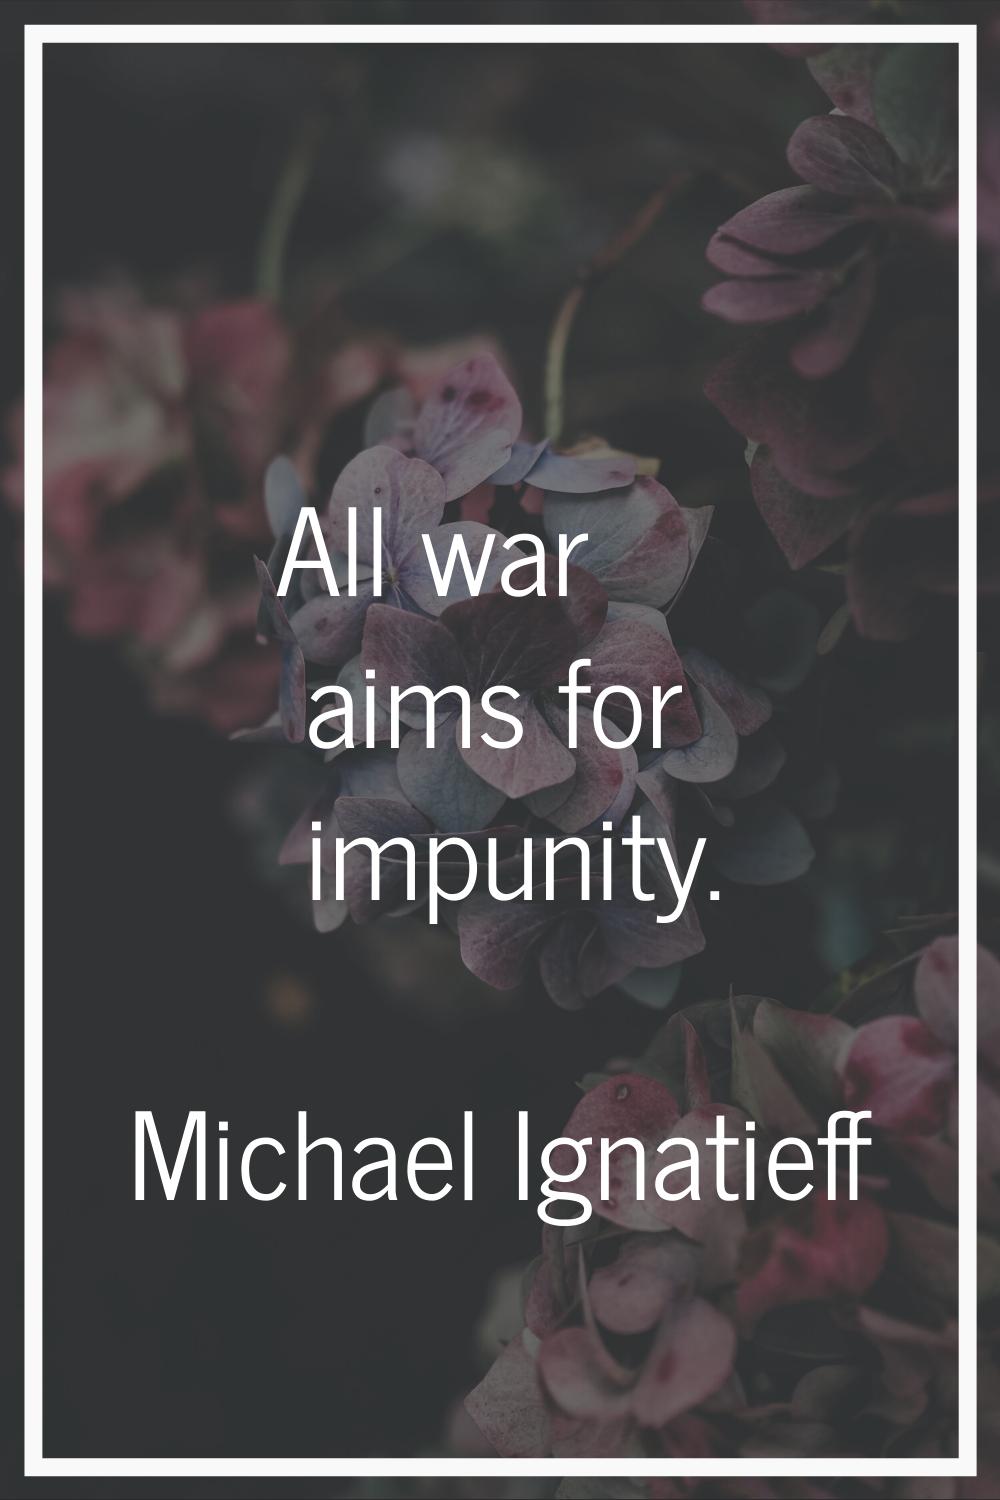 All war aims for impunity.